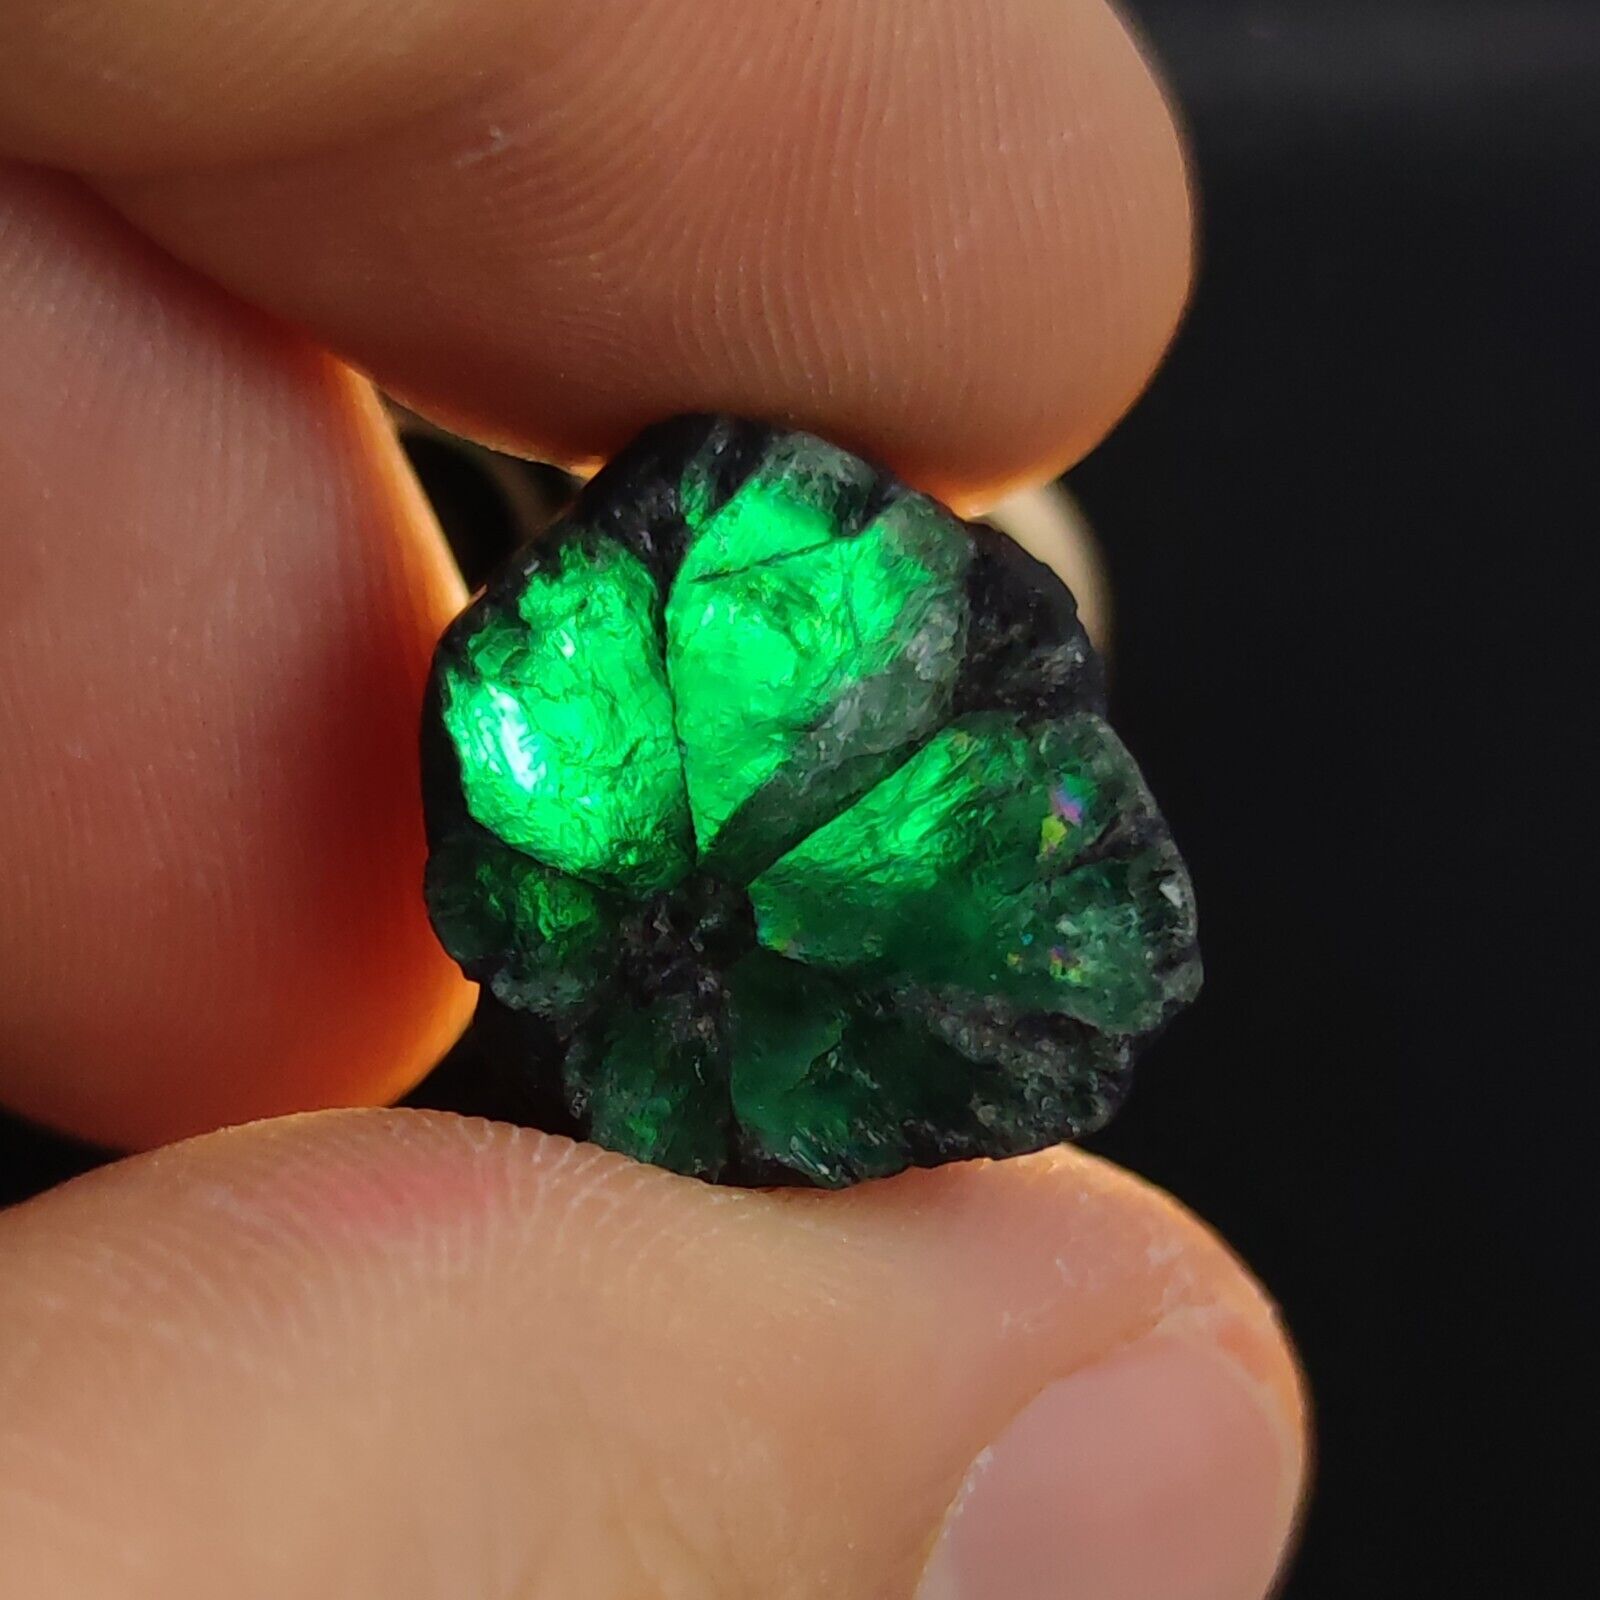 BIG NATURAL RARE TRAPICHE EMERALD CRYSTAL FROM COLOMBIA TOP QUALITY - 24.38 Cts.